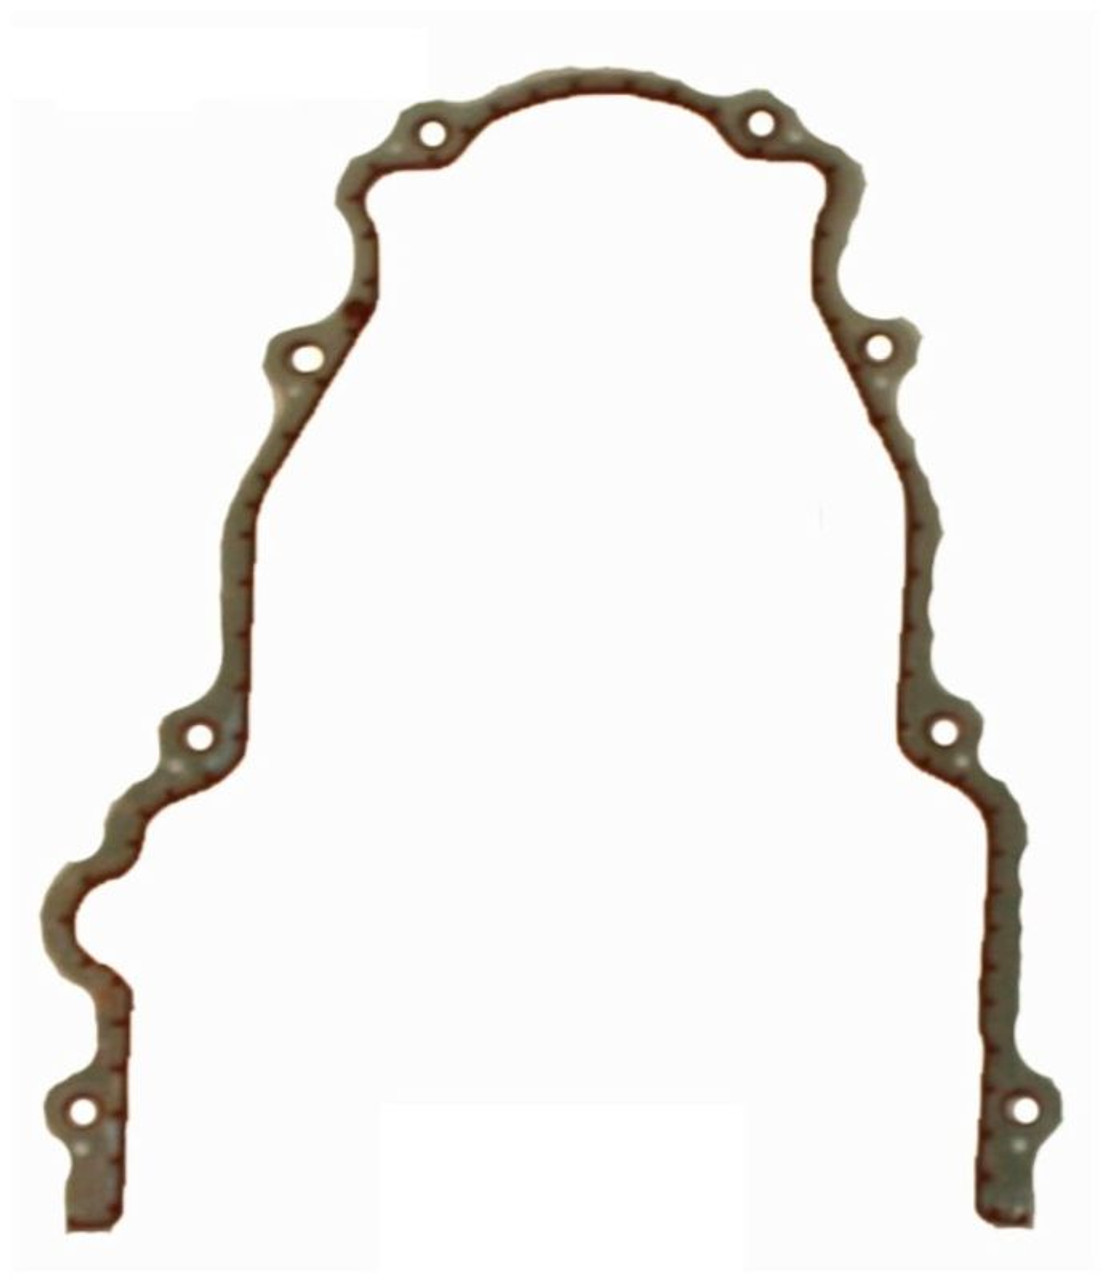 2008 Cadillac Escalade 6.2L Engine Timing Cover Gasket TCG293-A -468